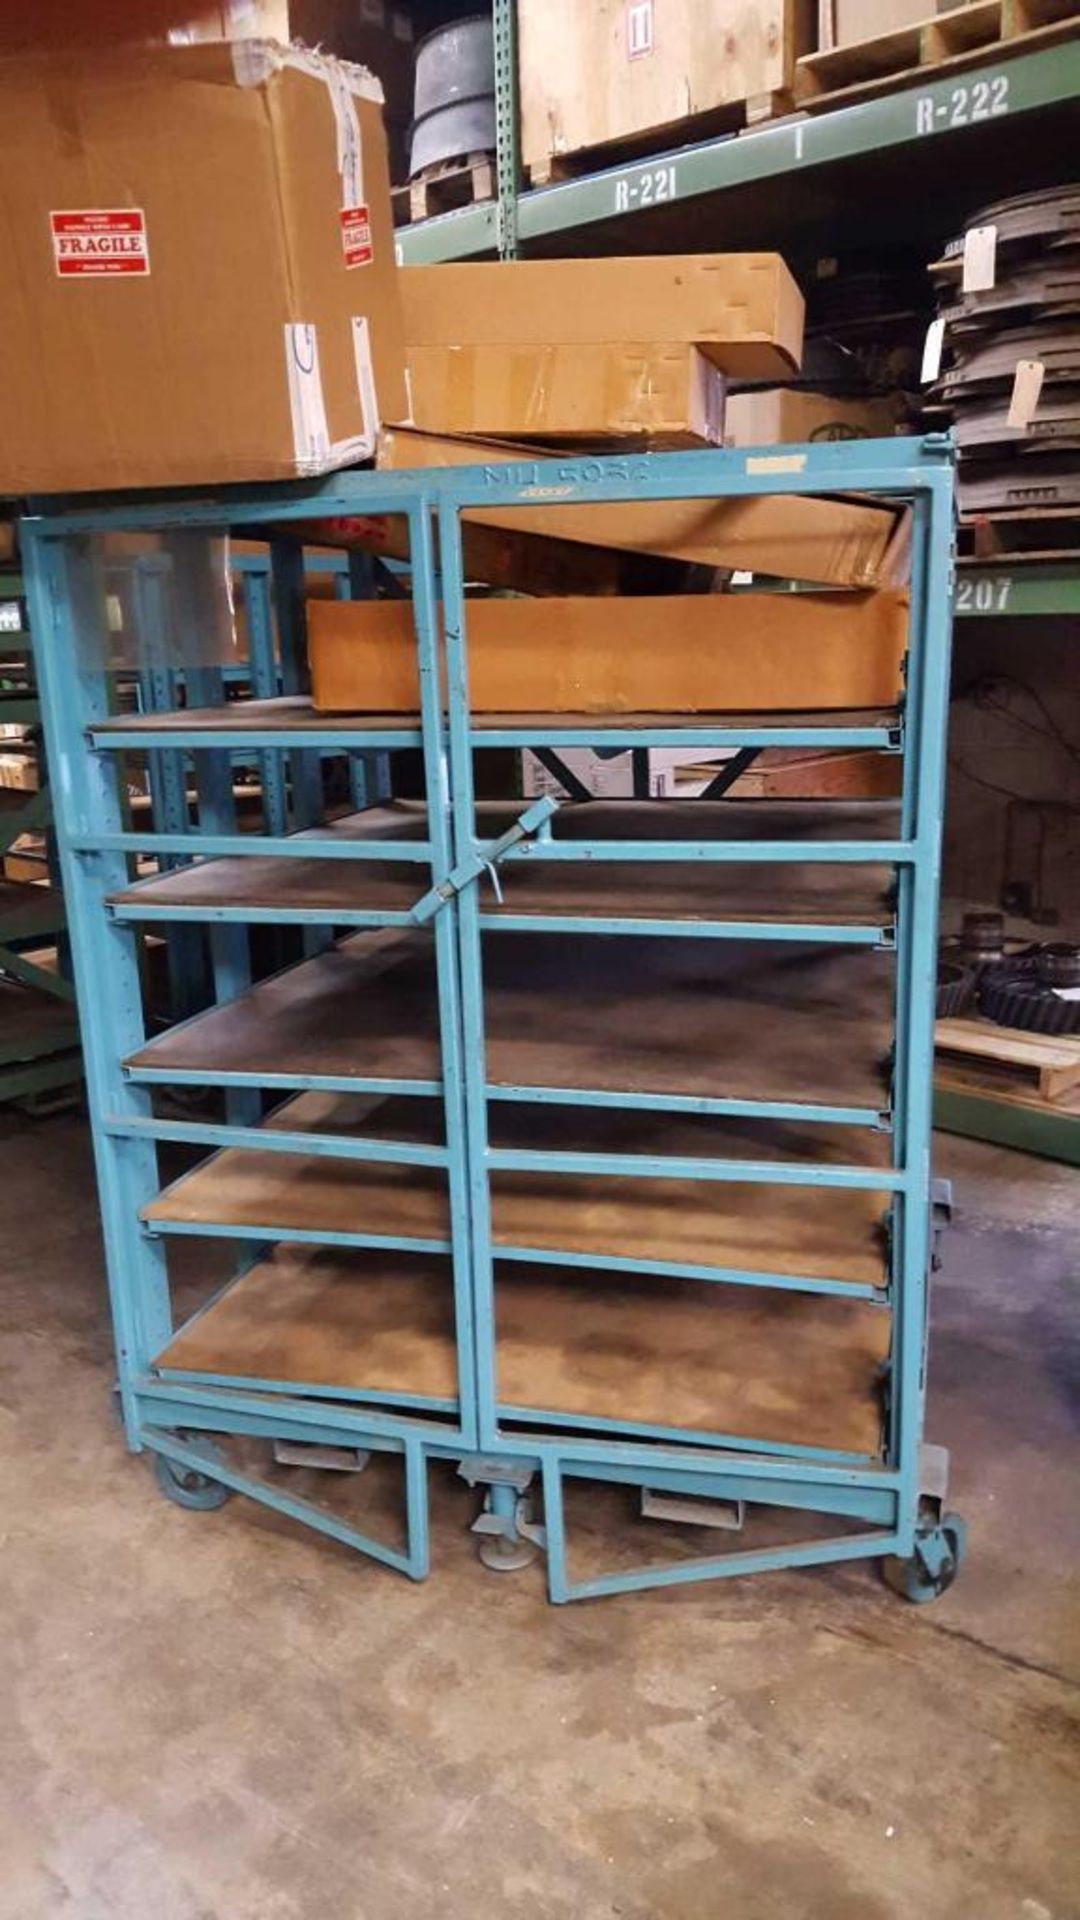 Lot of (2) assorted portable shop carts, 4' x 4' x 6' X 5 tier with slide out shelves - no contents